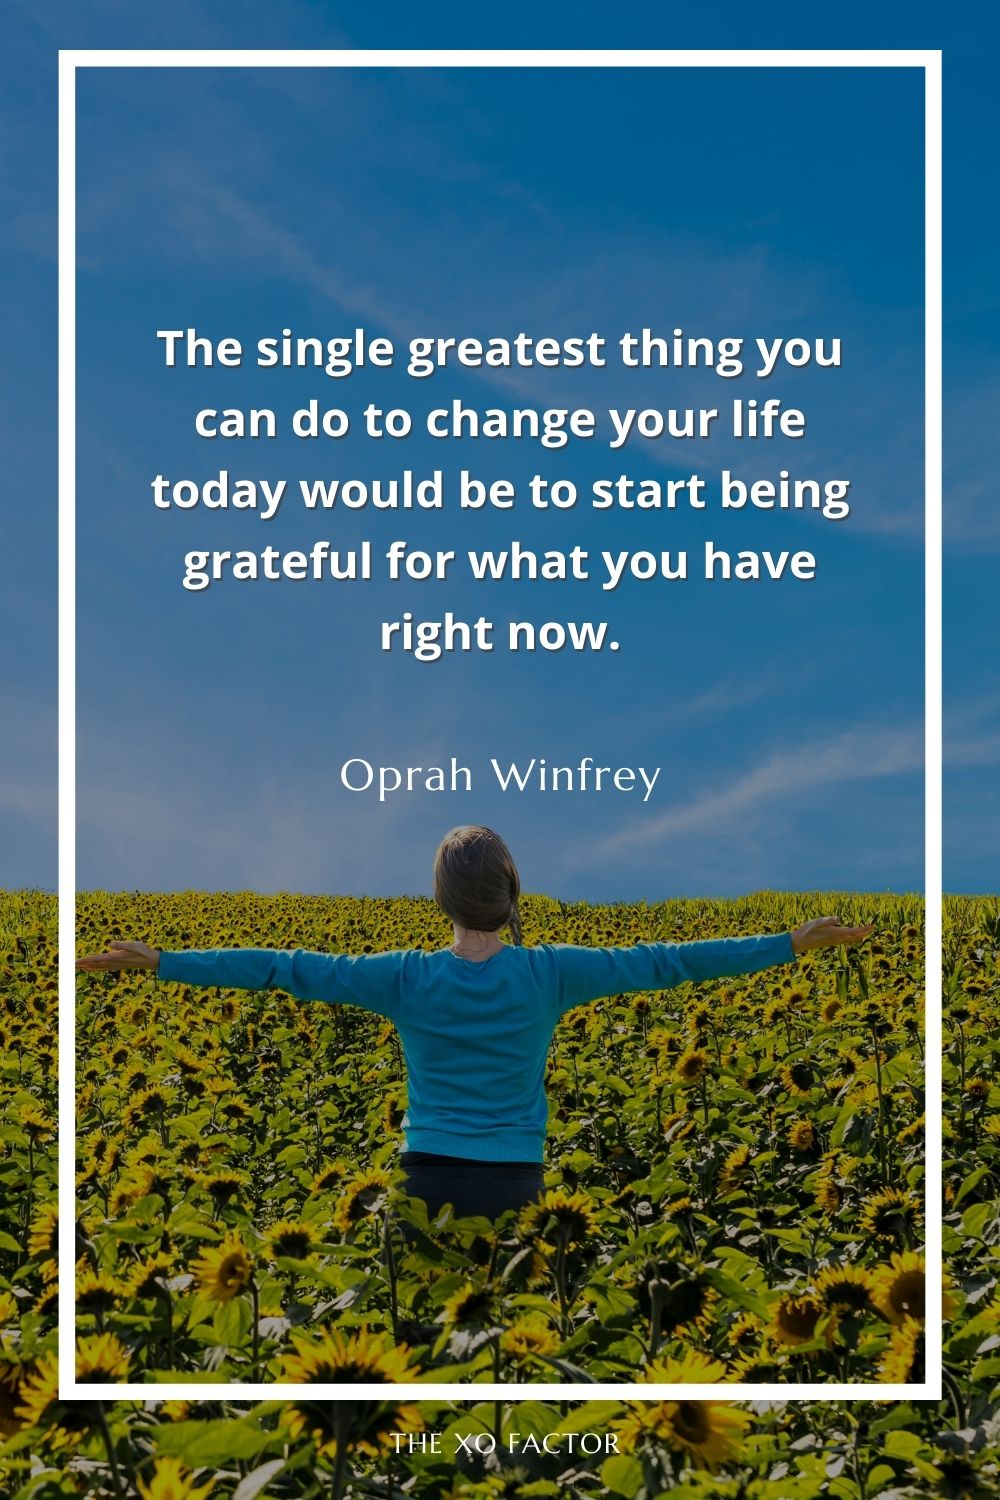 The single greatest thing you can do to change your life today would be to start being grateful for what you have right now.